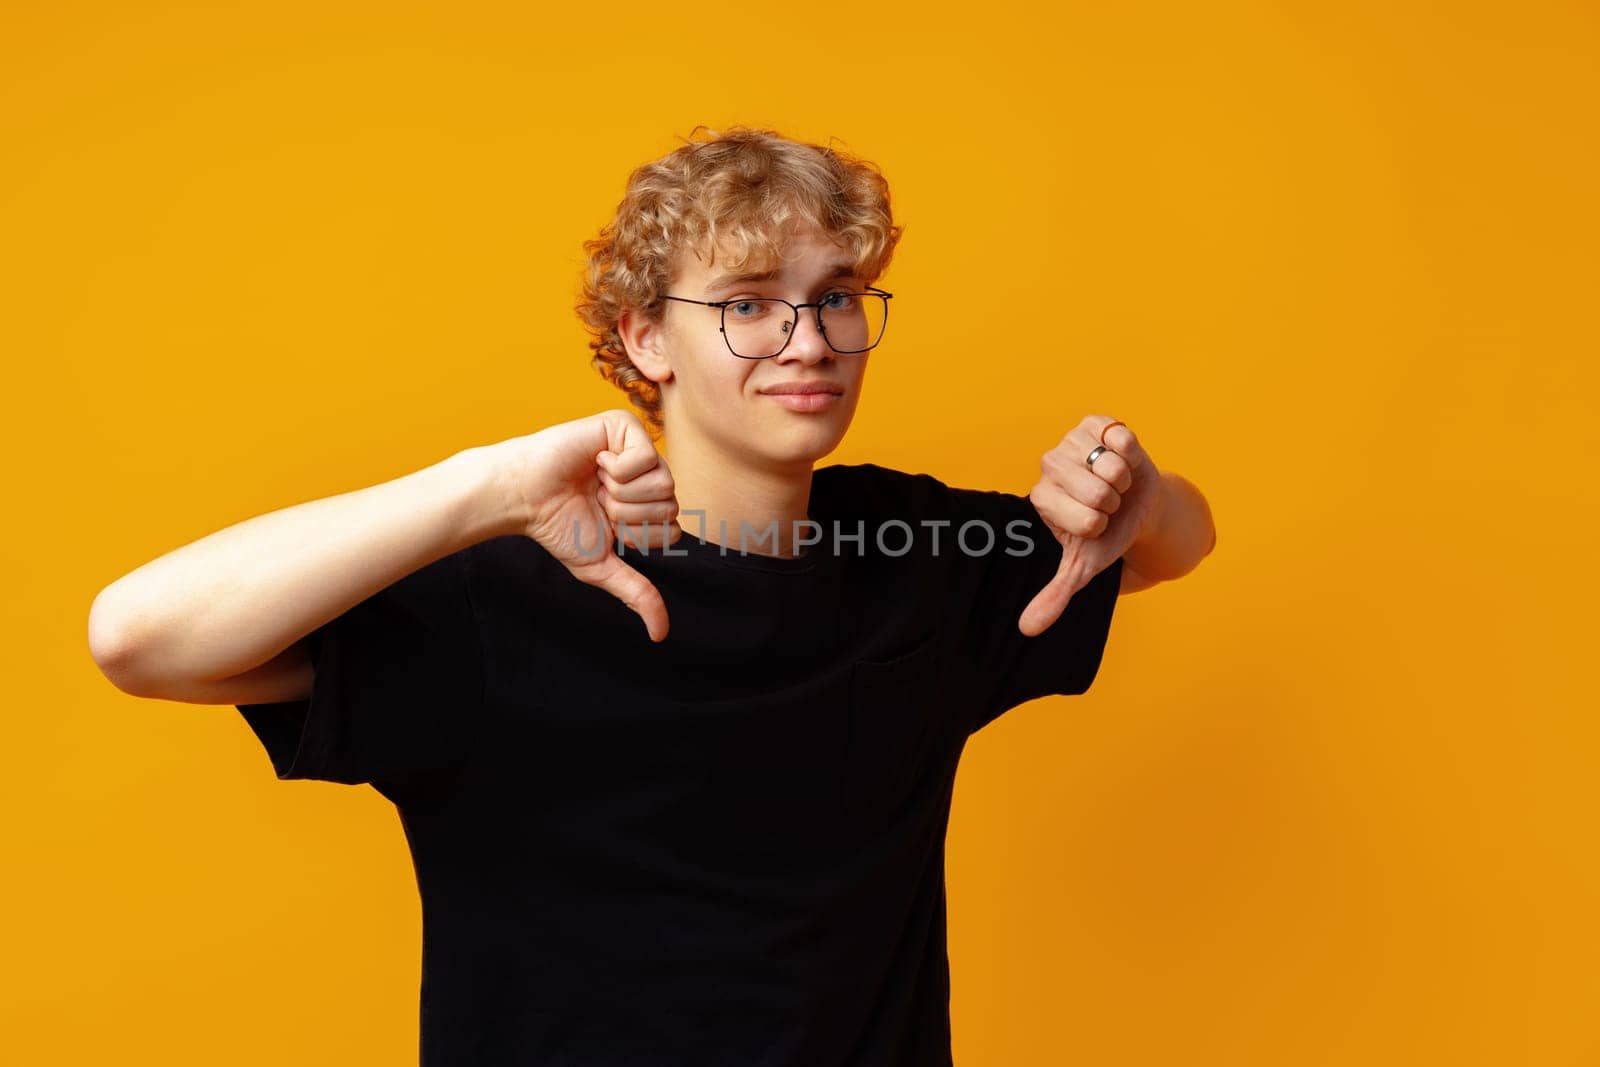 Young man showing thumbs down against yellow background in studio